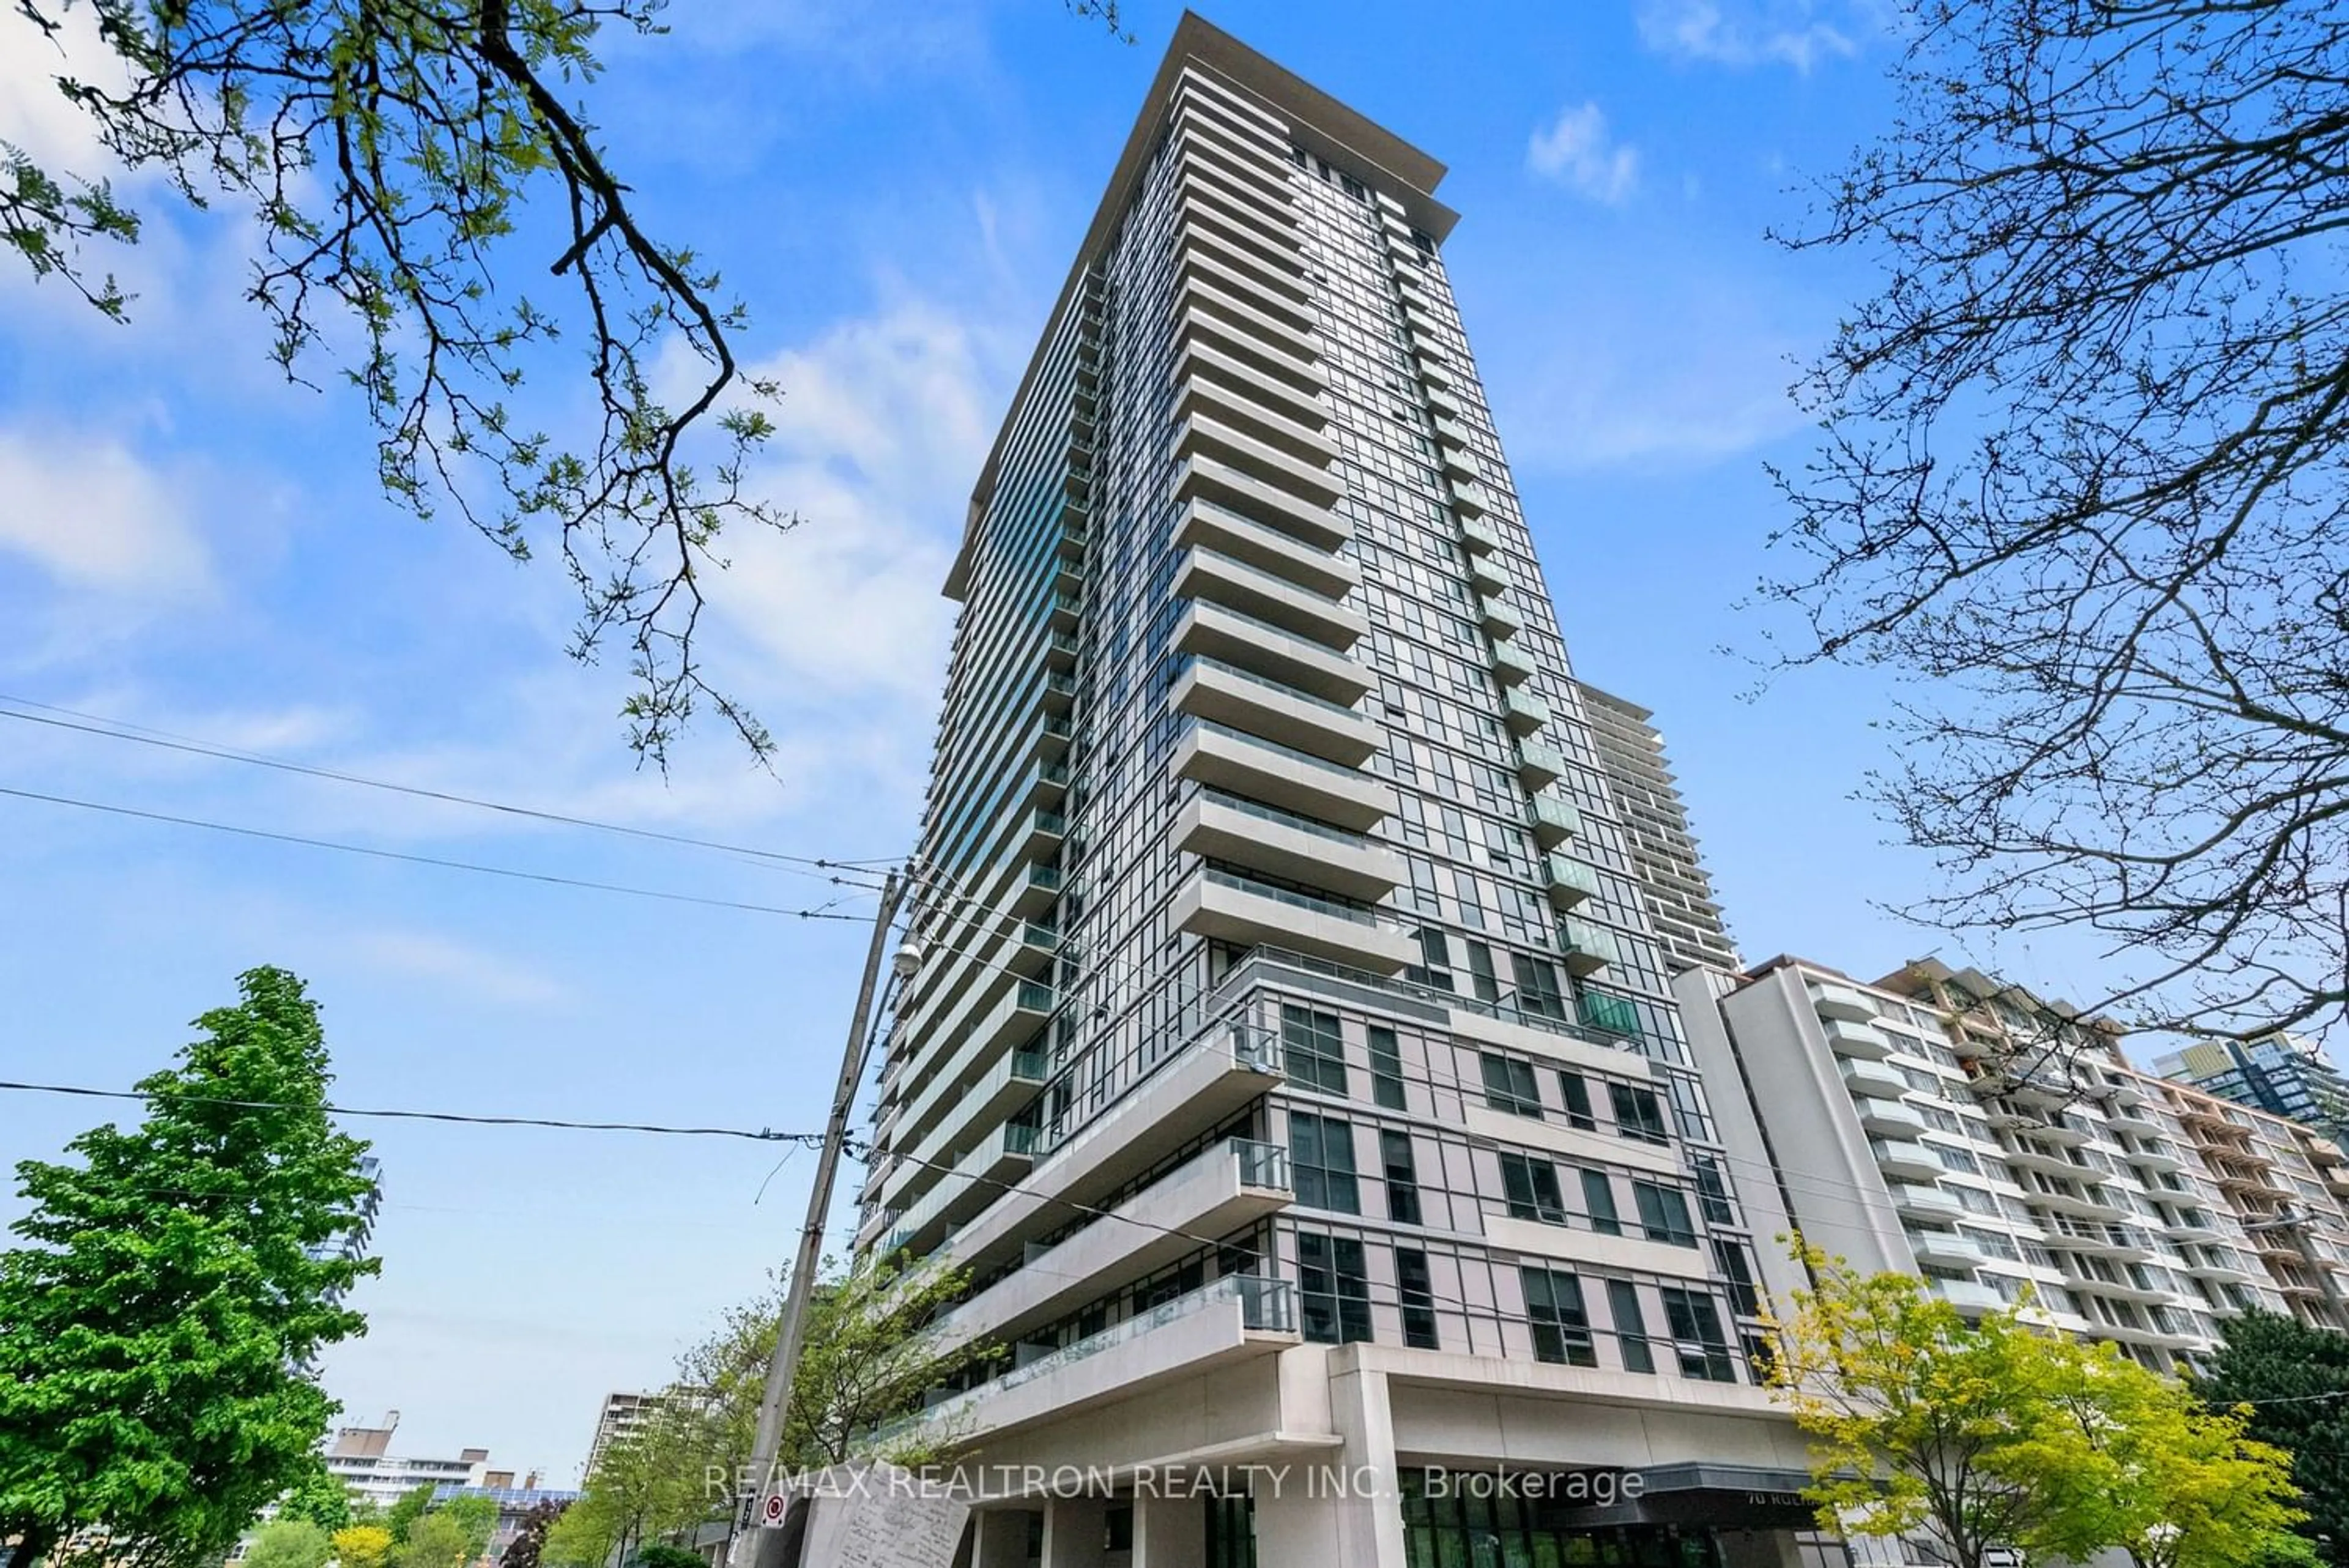 A pic from exterior of the house or condo for 70 Roehampton Ave #1220, Toronto Ontario M4P 1R2